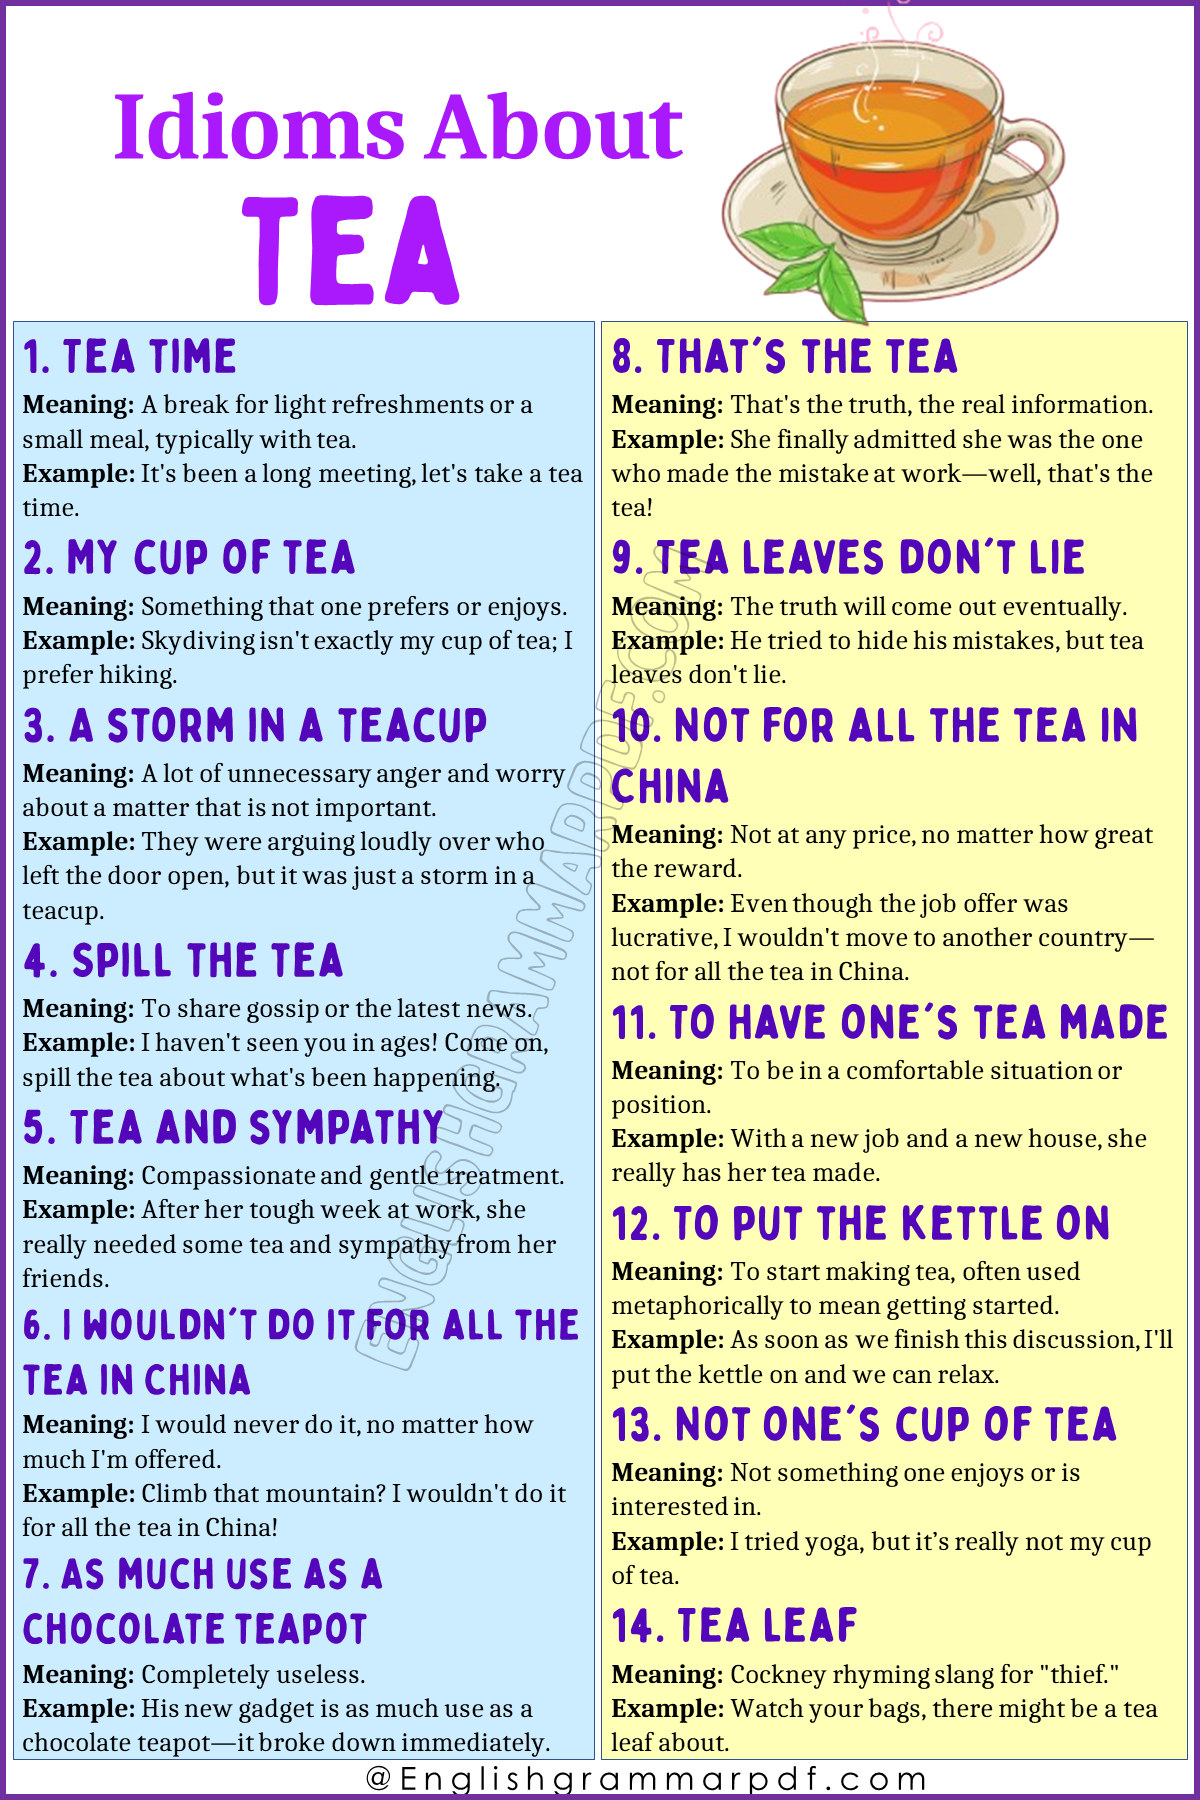 Idioms about Tea